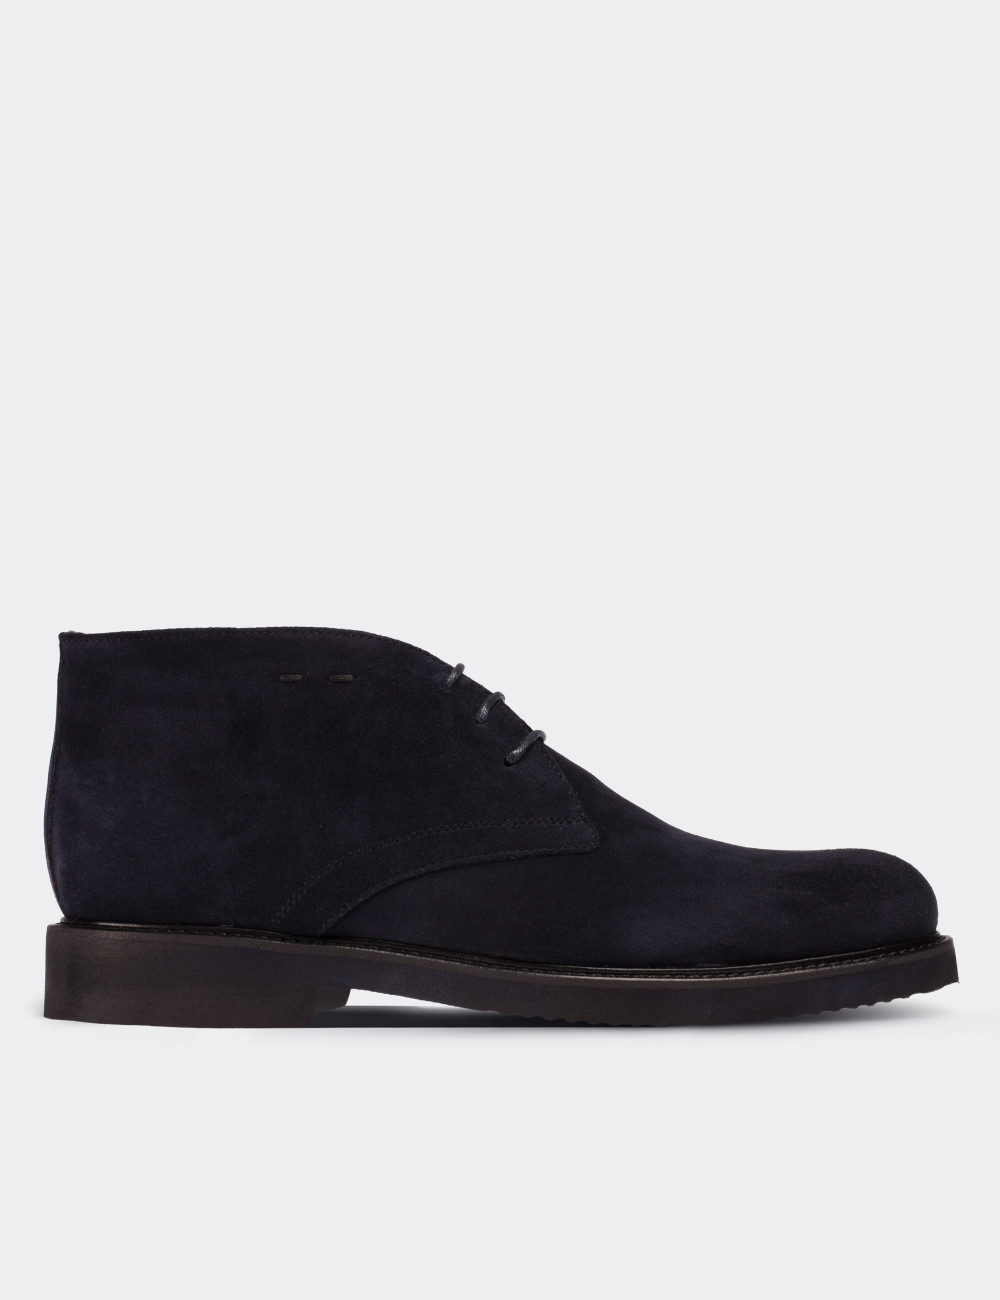 Navy Suede Leather Desert Boots - 01295MLCVE04